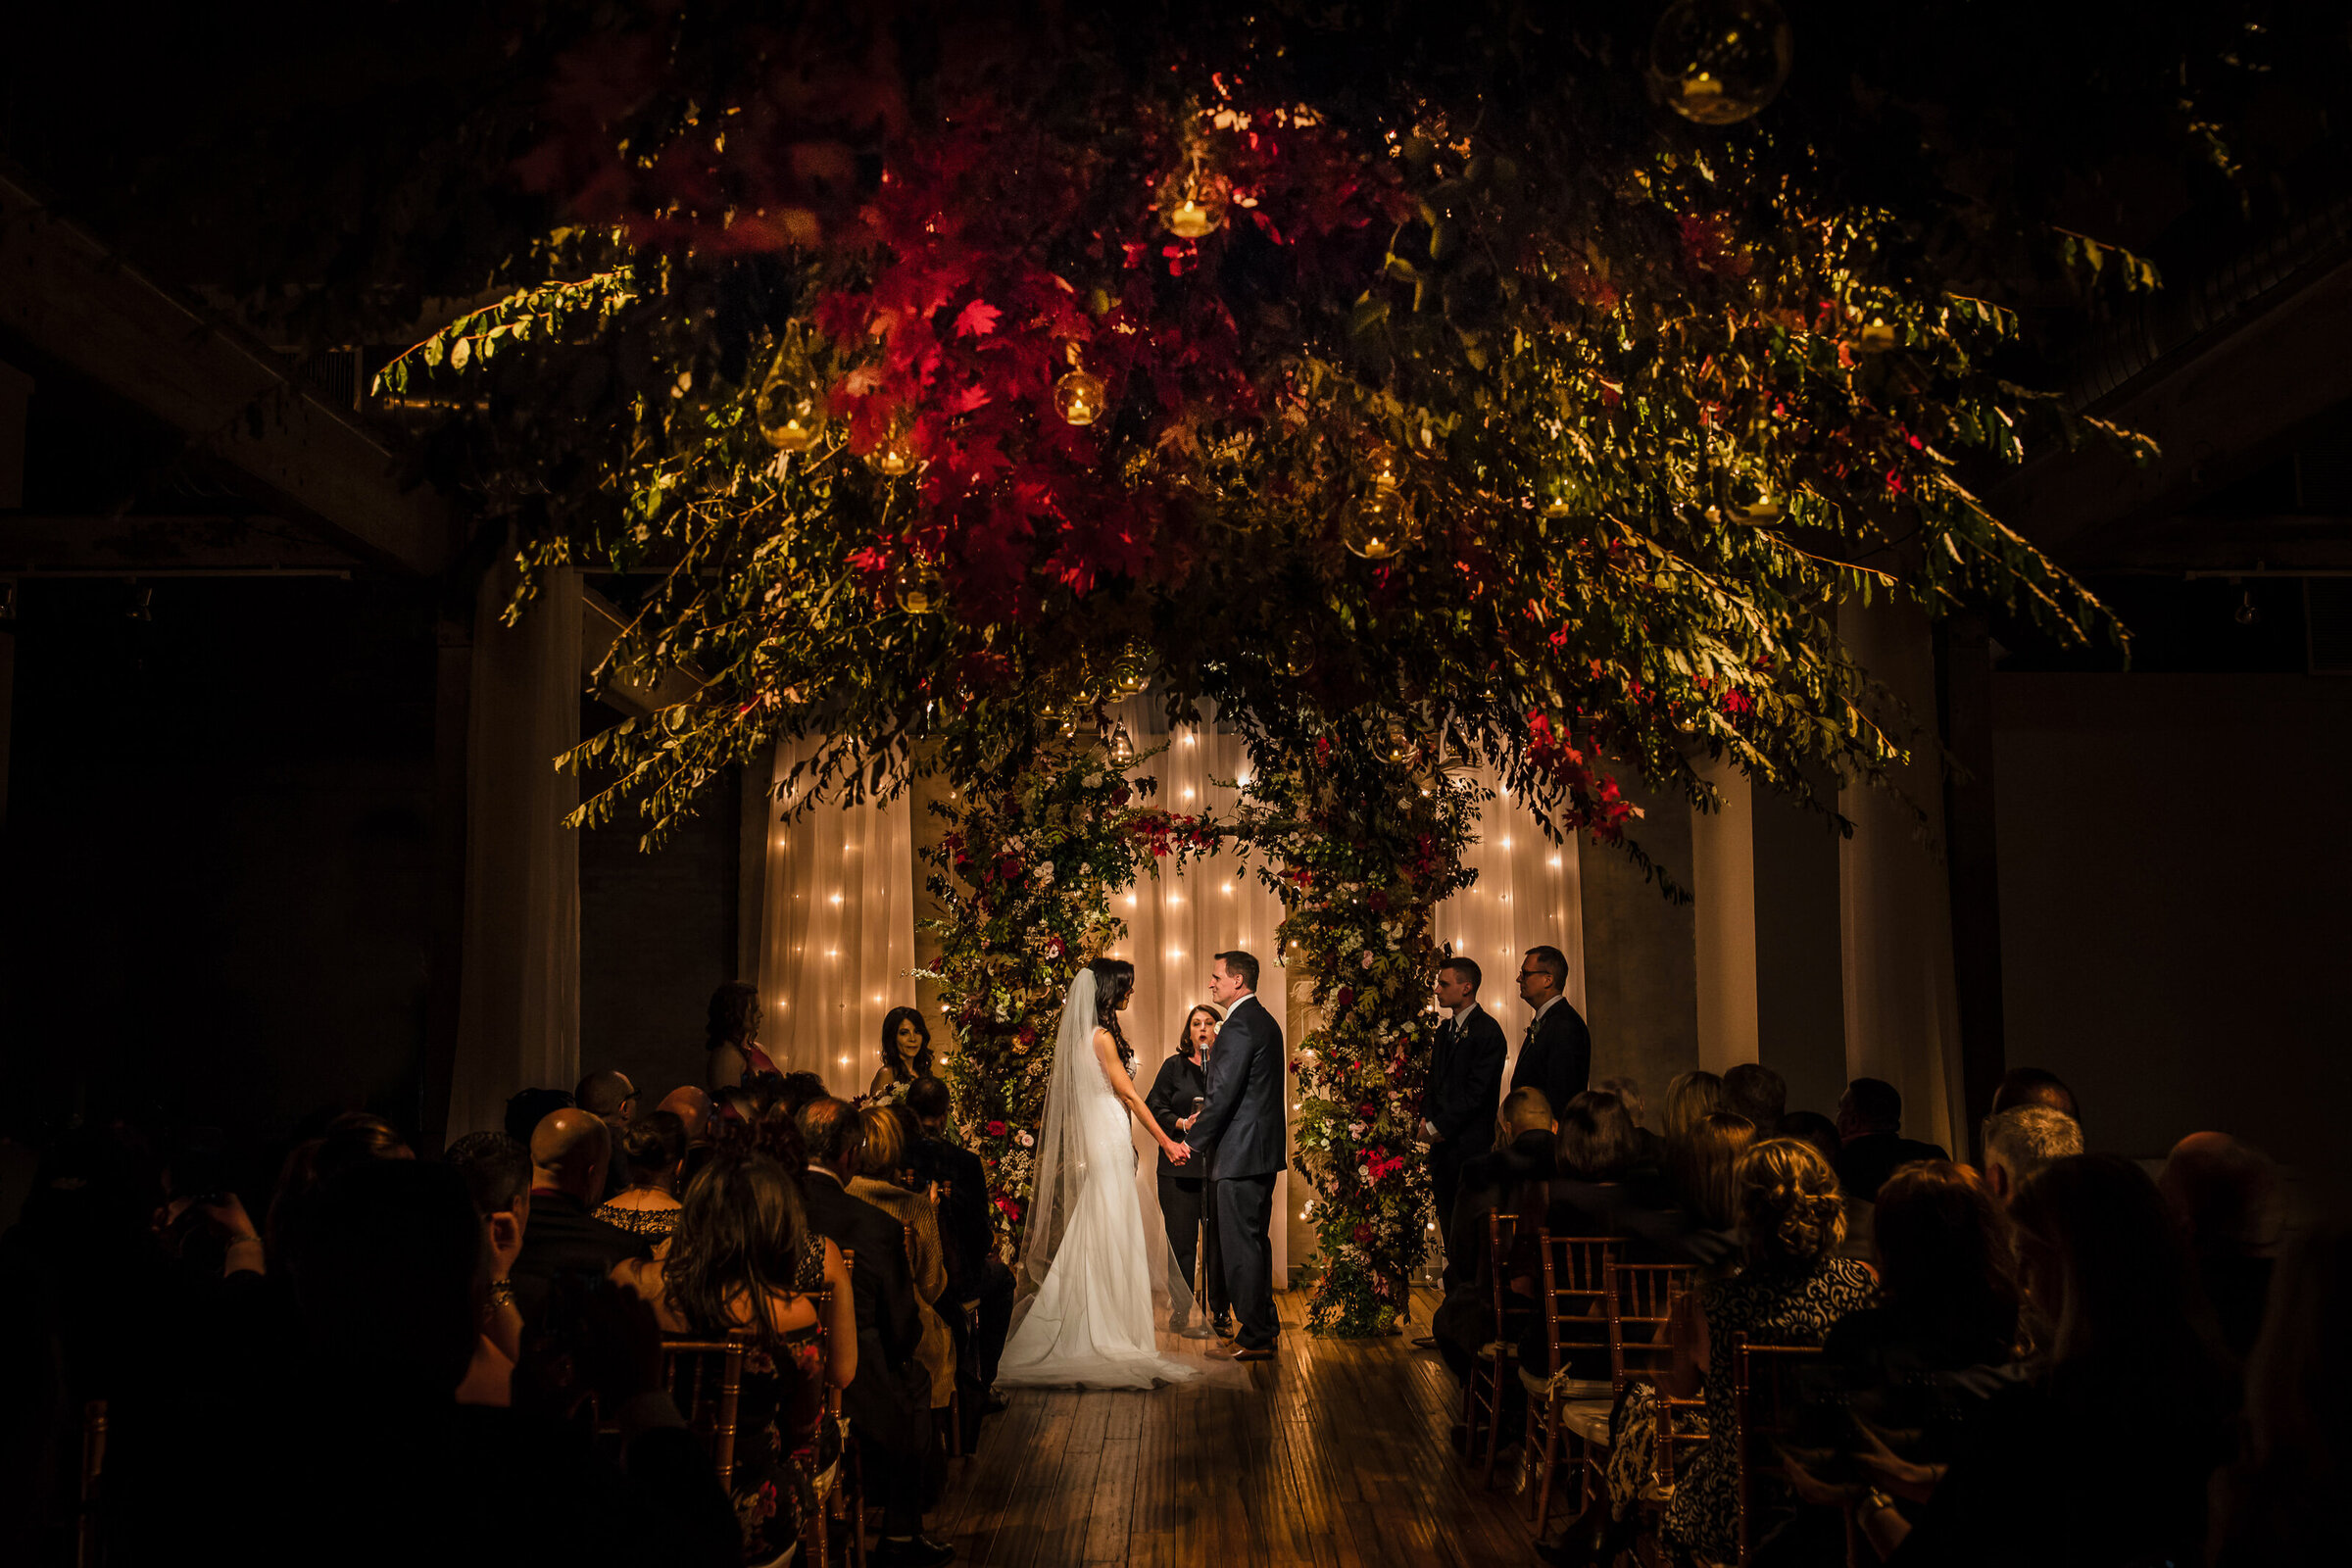 Stunning floral decor at Front and Palmer wedding ceremony